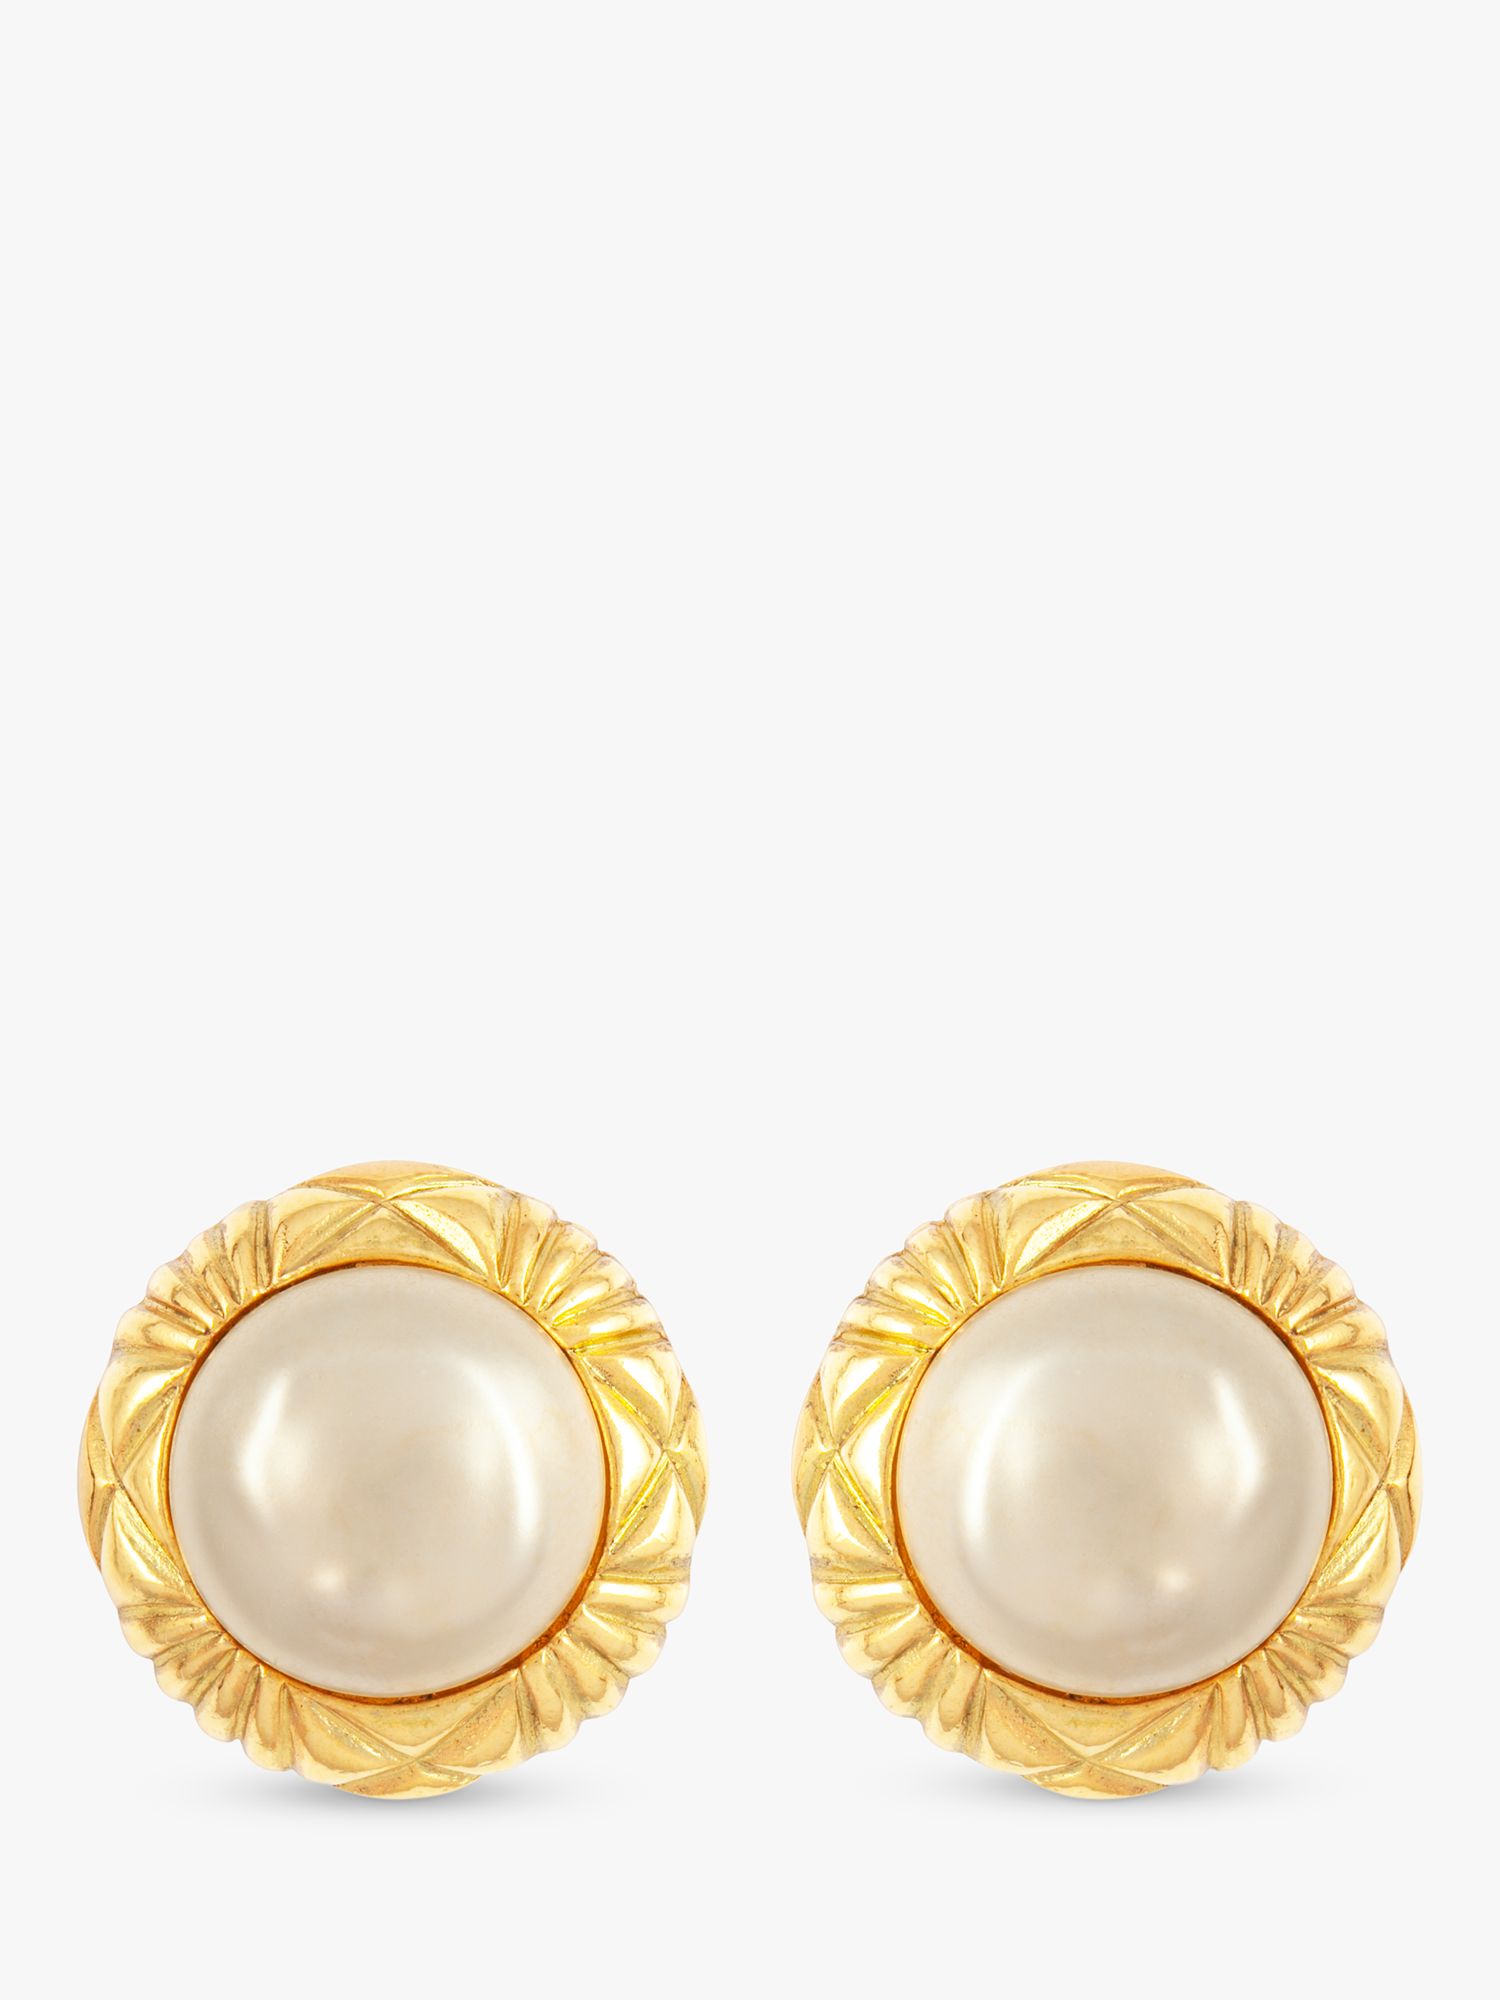 Susan Caplan Vintage Chanel Gold Plated Faux Pearl Clip-On Earrings, Dated  Circa 1980s at John Lewis & Partners